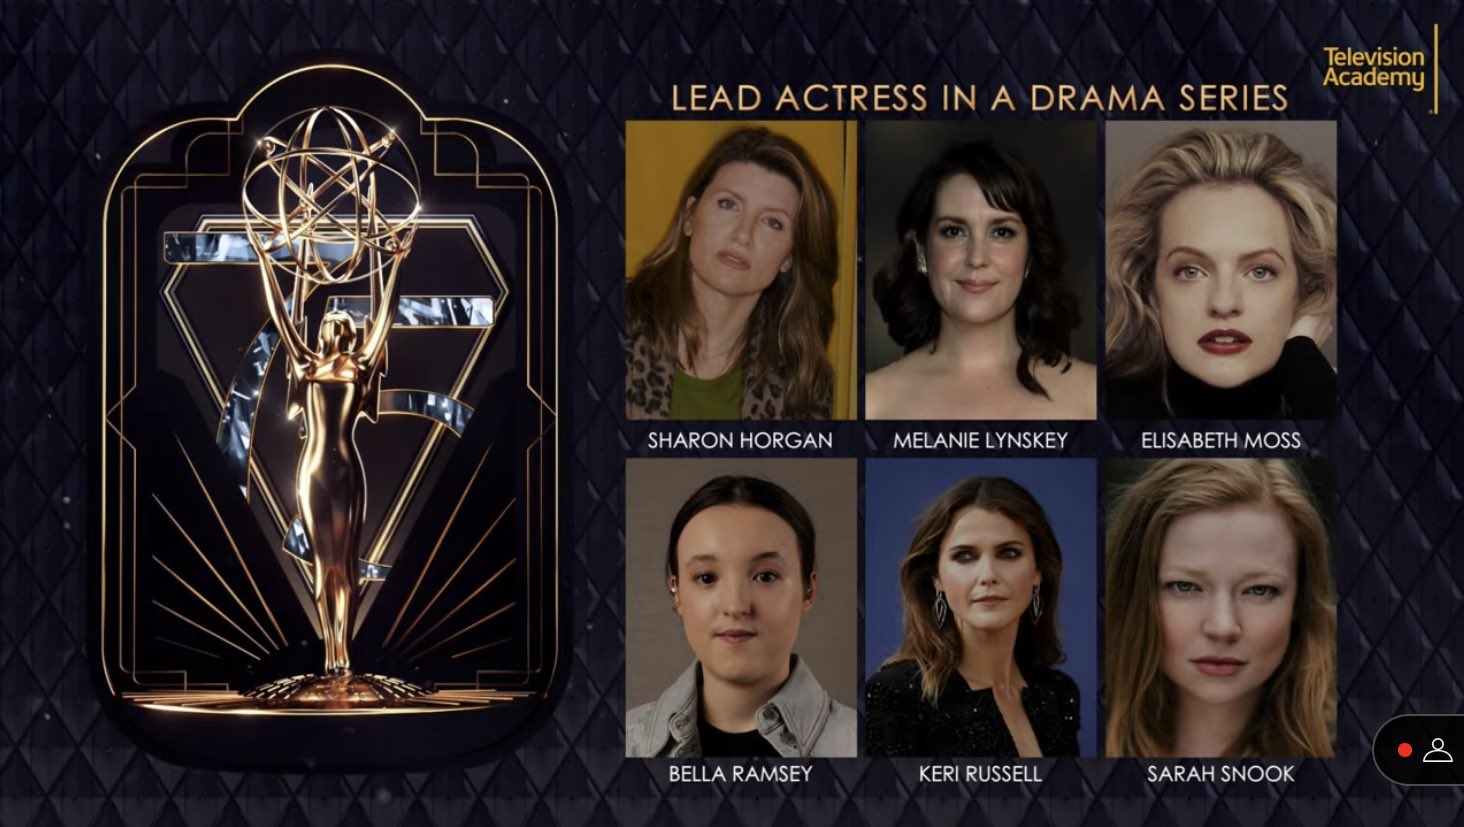 Bella Ramsey Updates on X: The Emmy Awards have nominated Bella Ramsey for  “Lead Drama Actress” for their role as Ellie in The Last Of Us !   / X